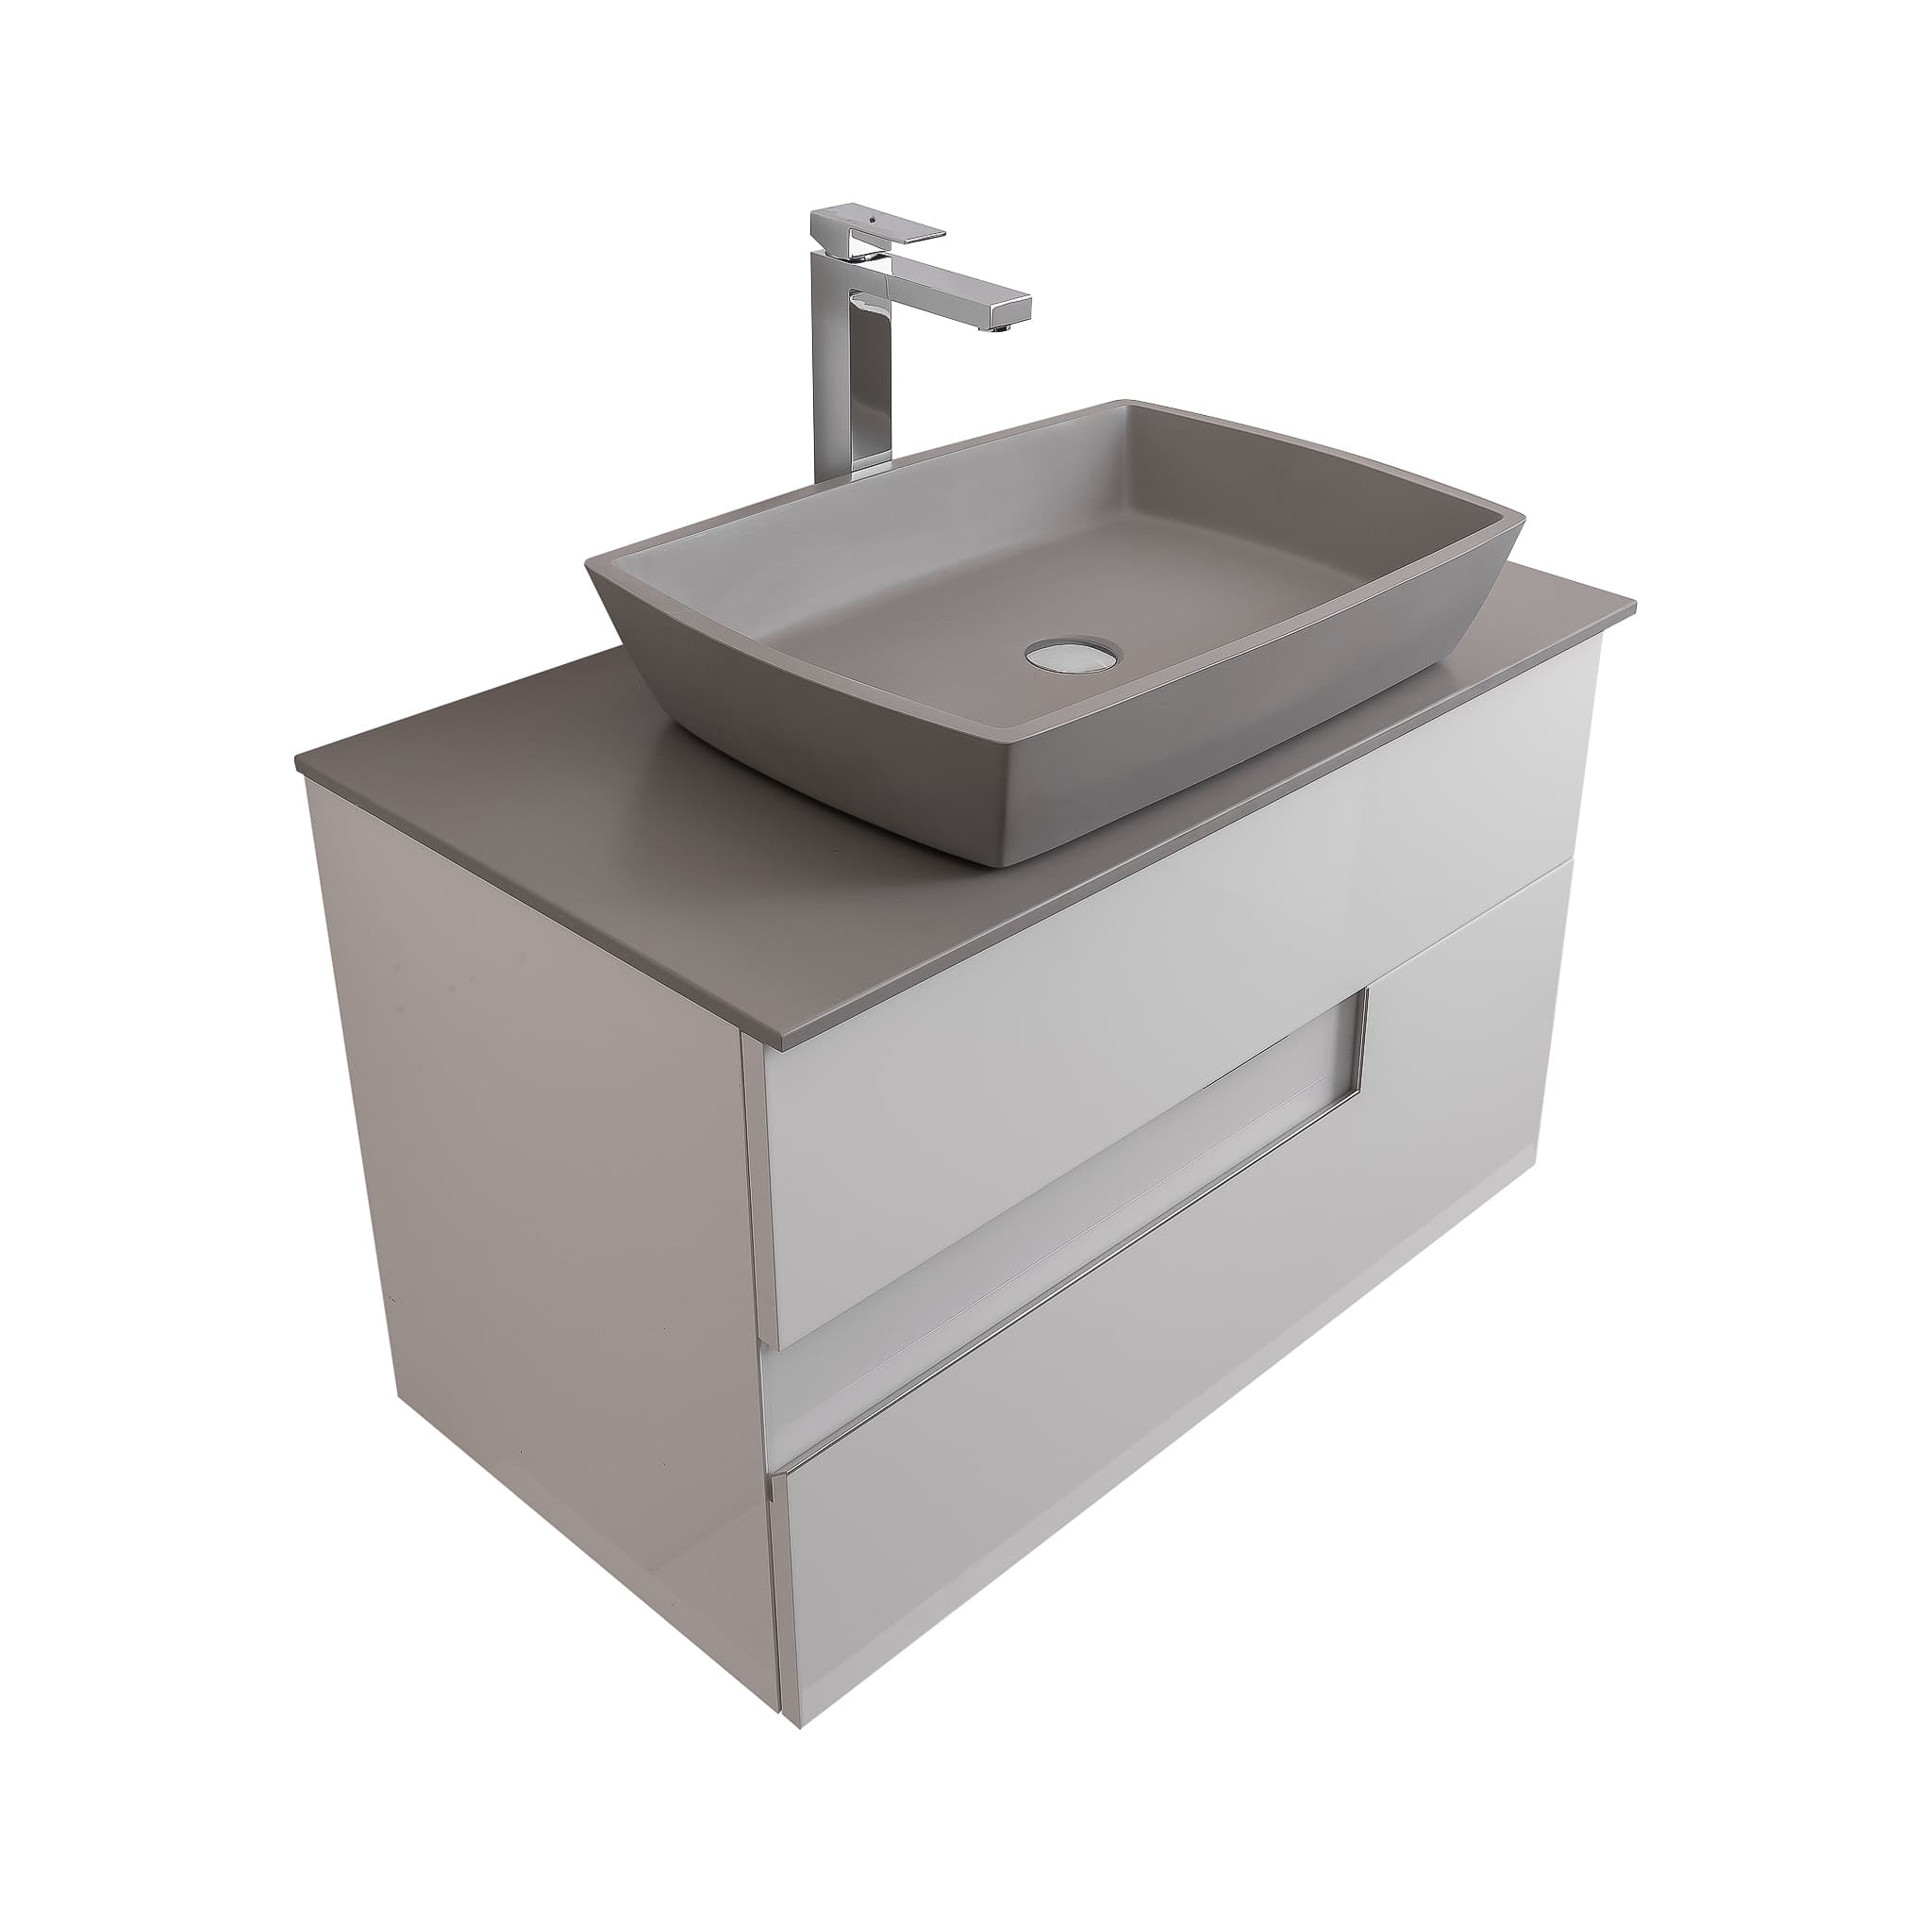 Vision 31.5 White High Gloss Cabinet, Solid Surface Flat Grey Counter And Square Solid Surface Grey Basin 1316, Wall Mounted Modern Vanity Set